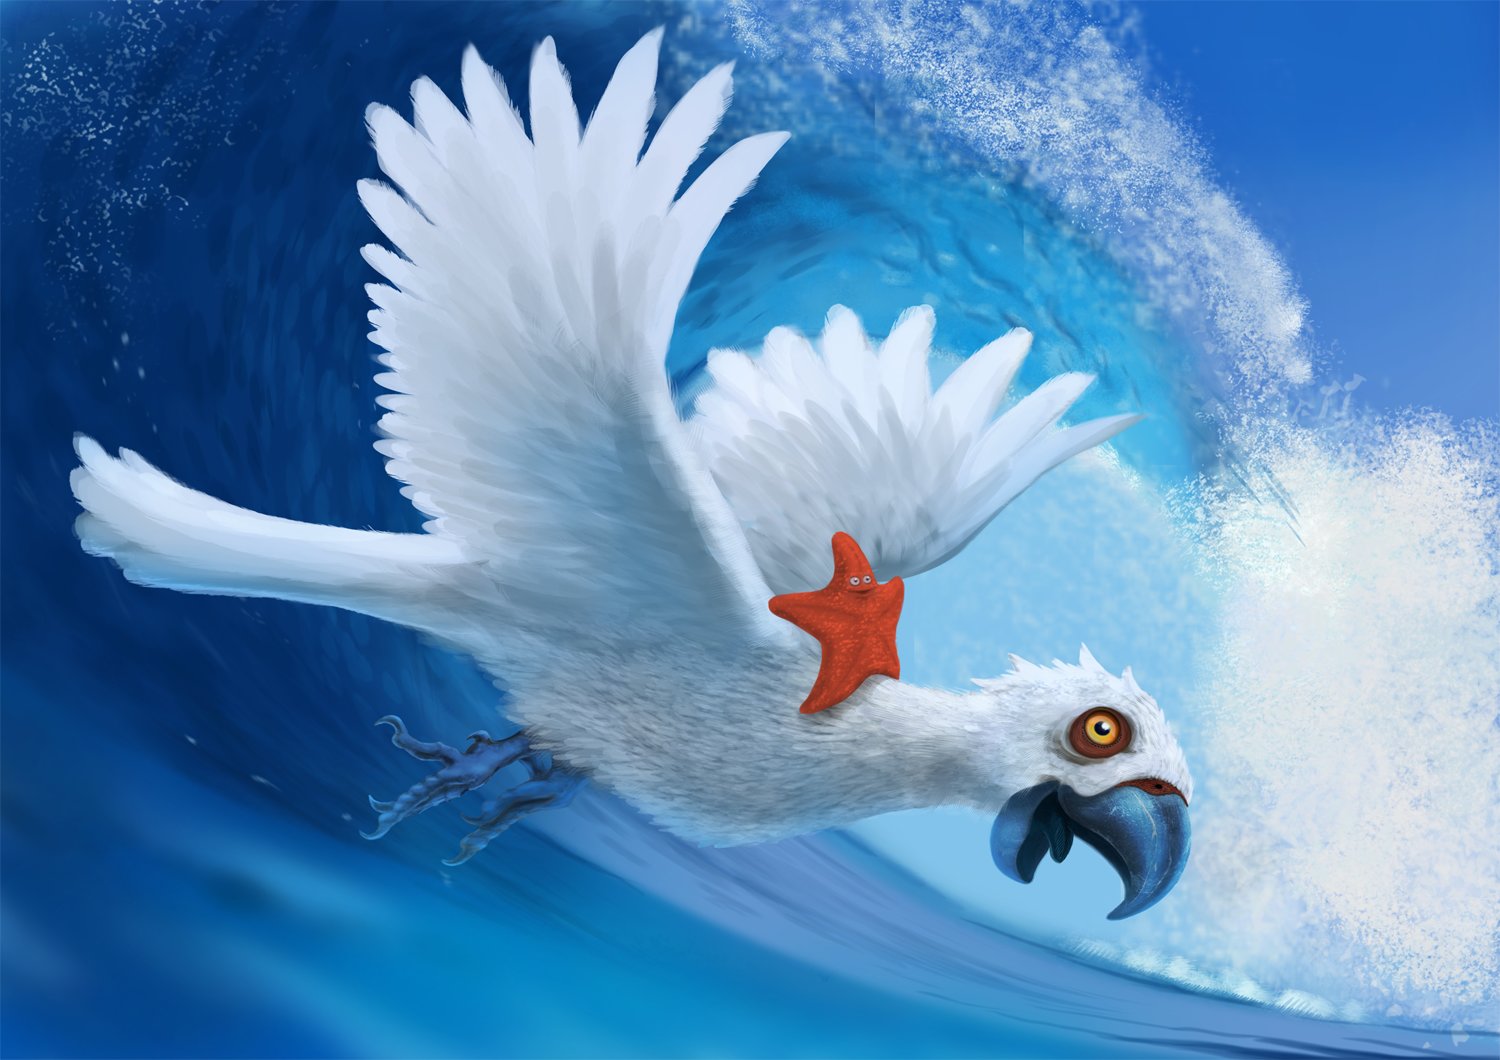 Parrot Surfin' with sea star